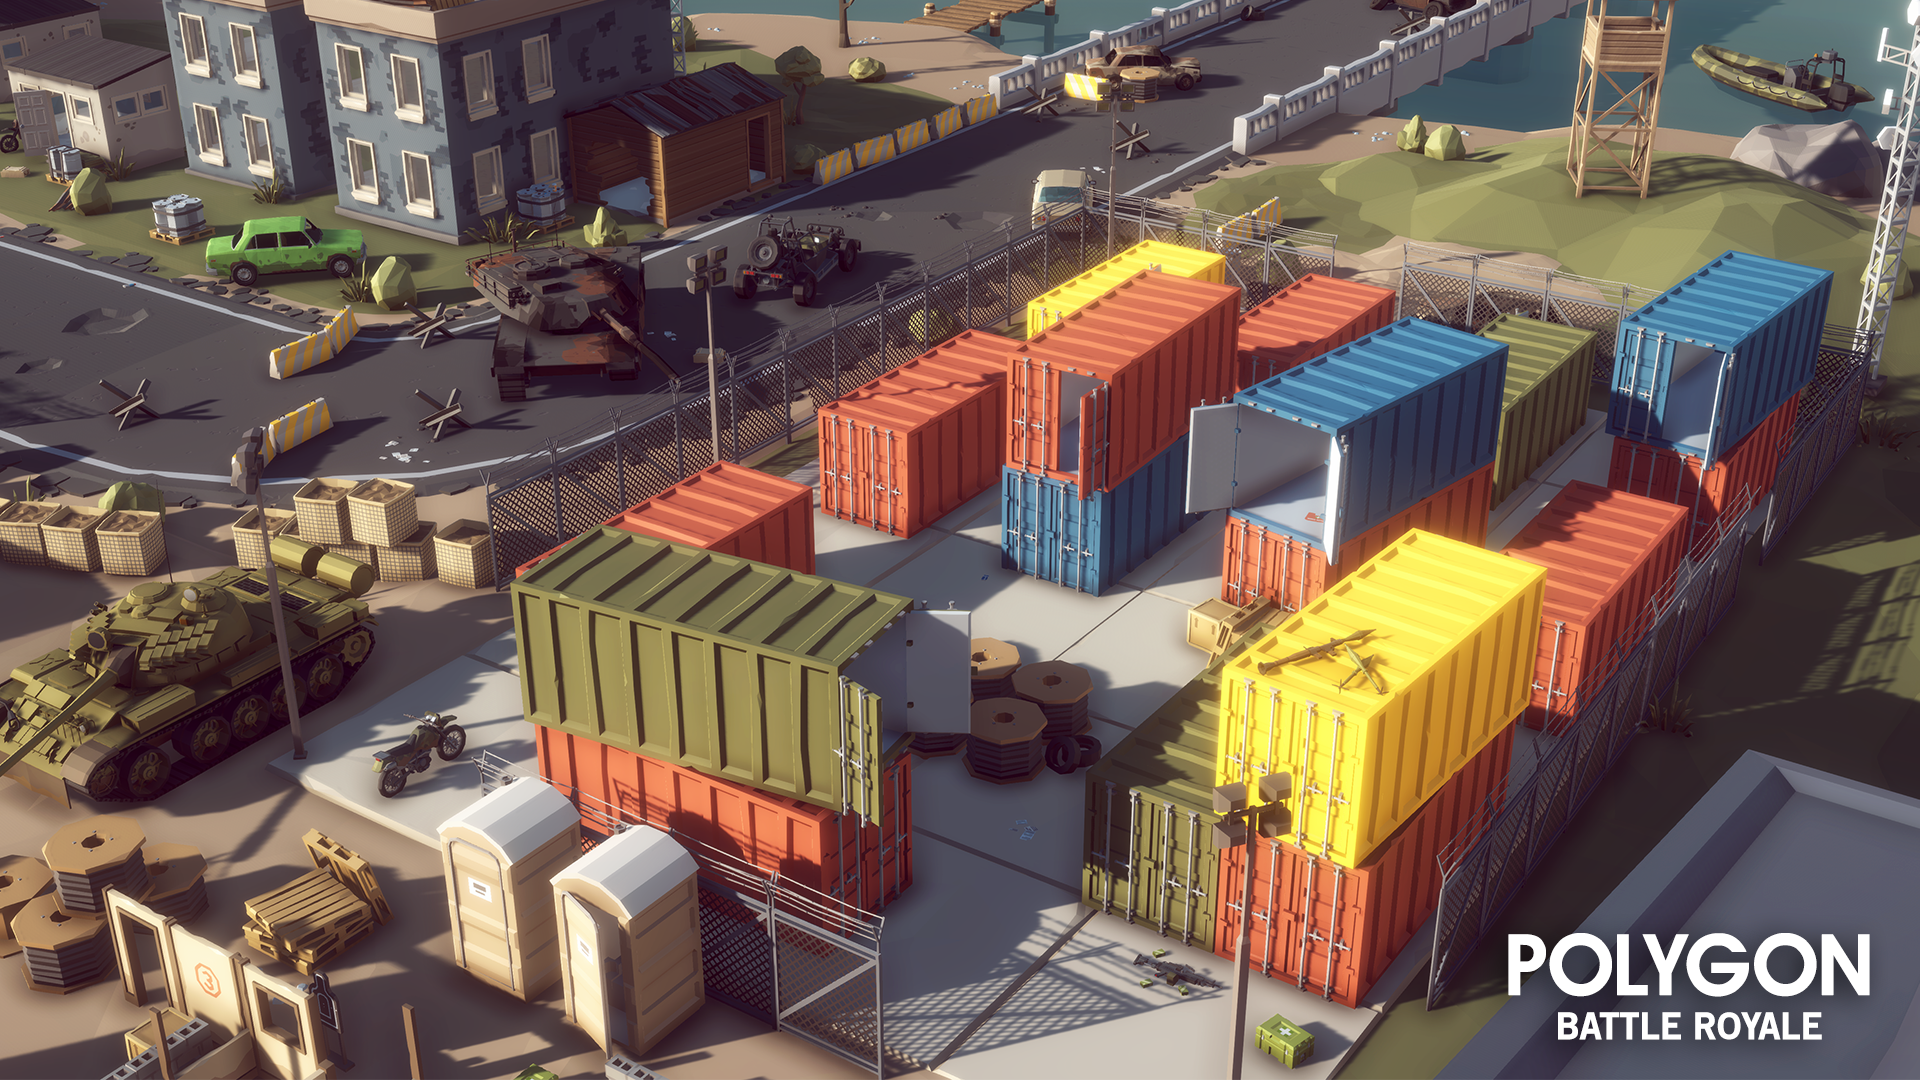 Battle Royale Pack low poly 3D cargo container assets for game development 